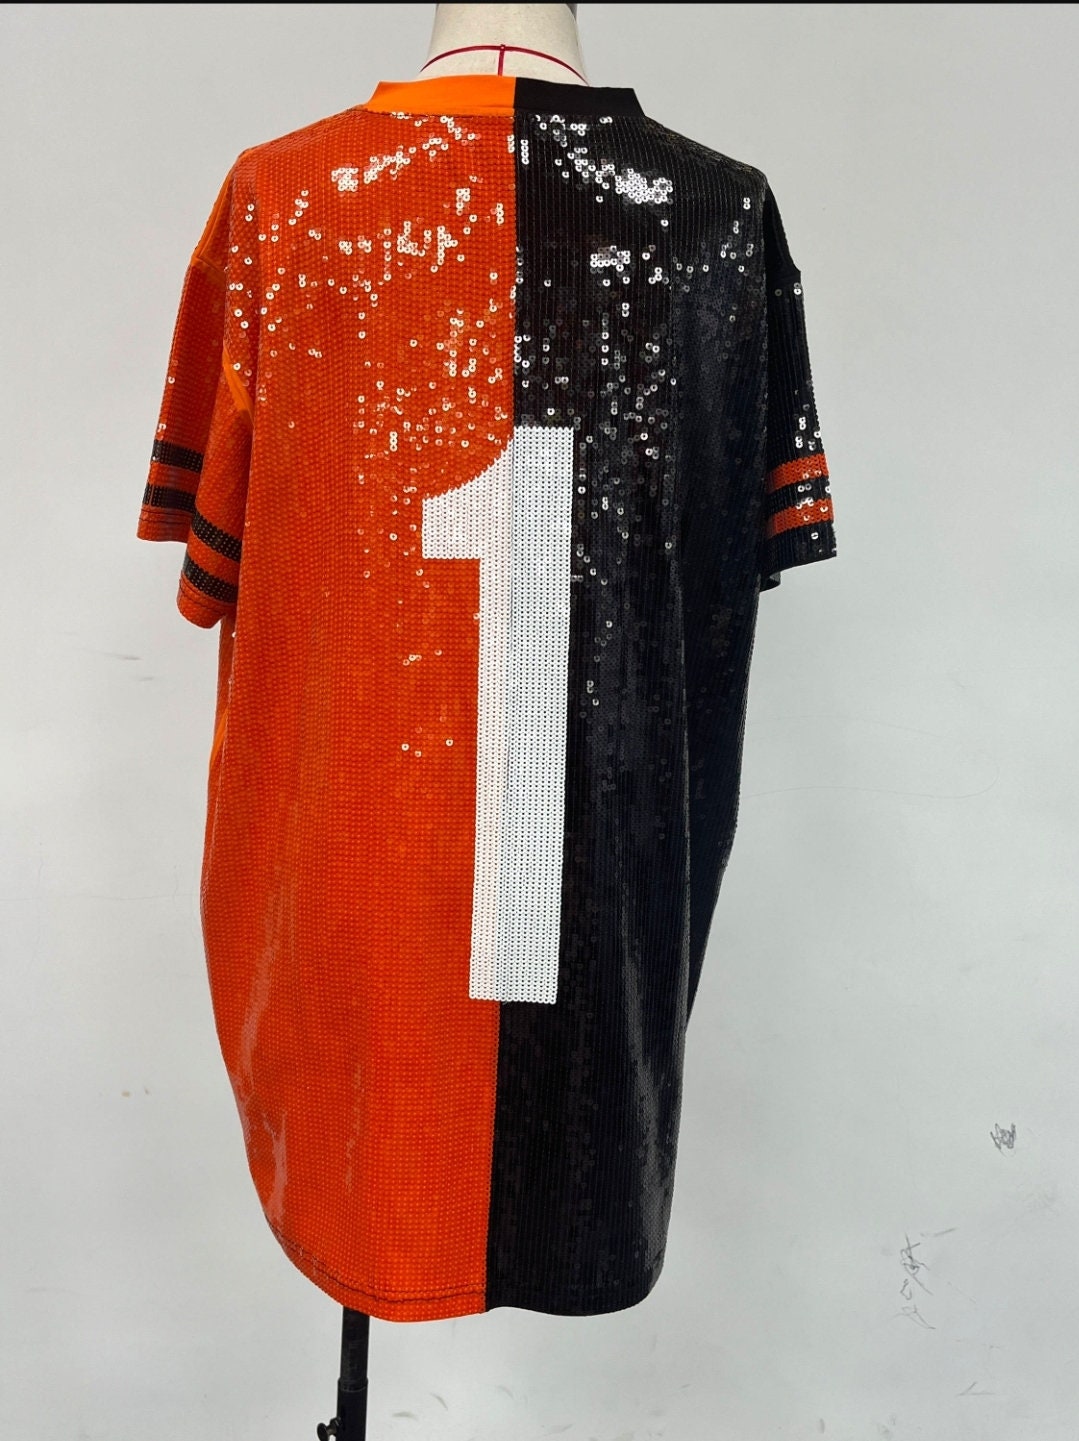 Whitewed Sequin Number 13 Football Jersey T Shirt Dresses Costumes for Women Holiday Nye